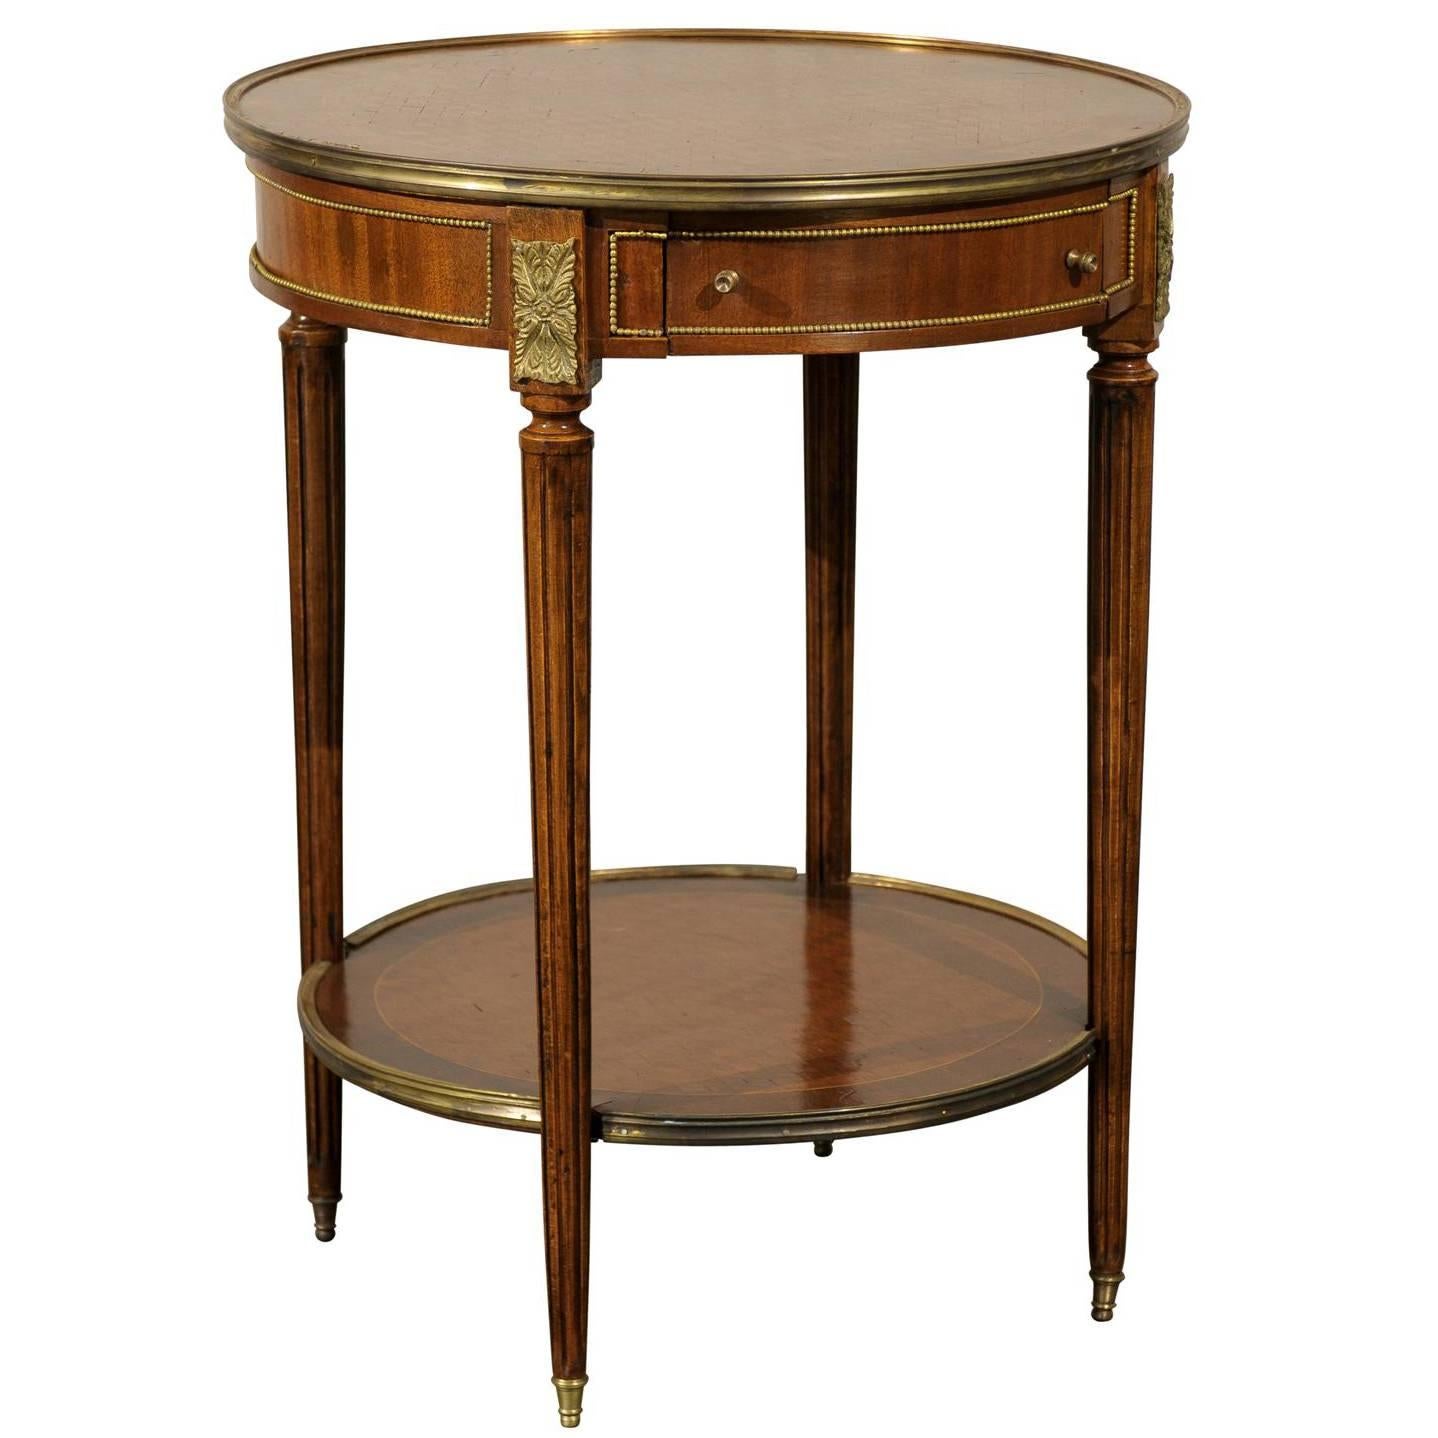 Early 20th Century French Bronze-Mounted Inlaid Bouilotte Table